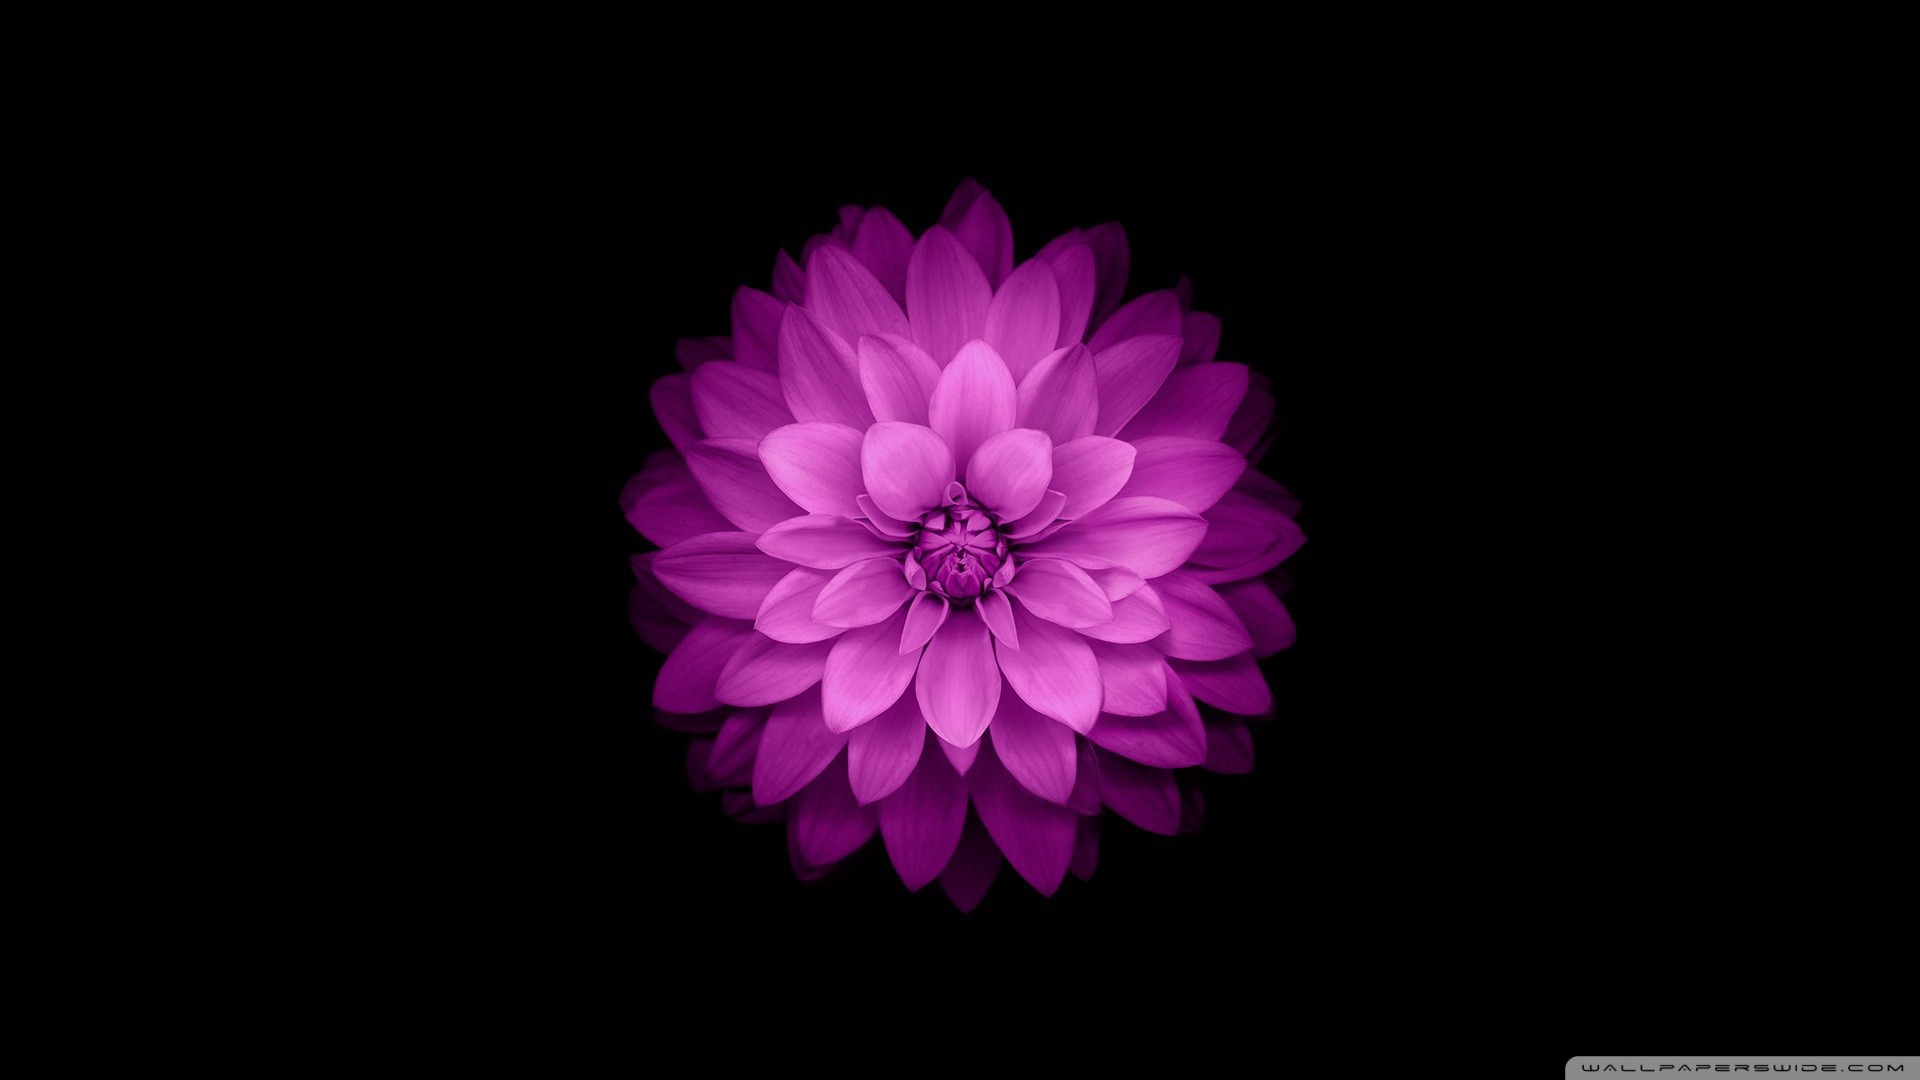 Blossomed lilac flower on a black background